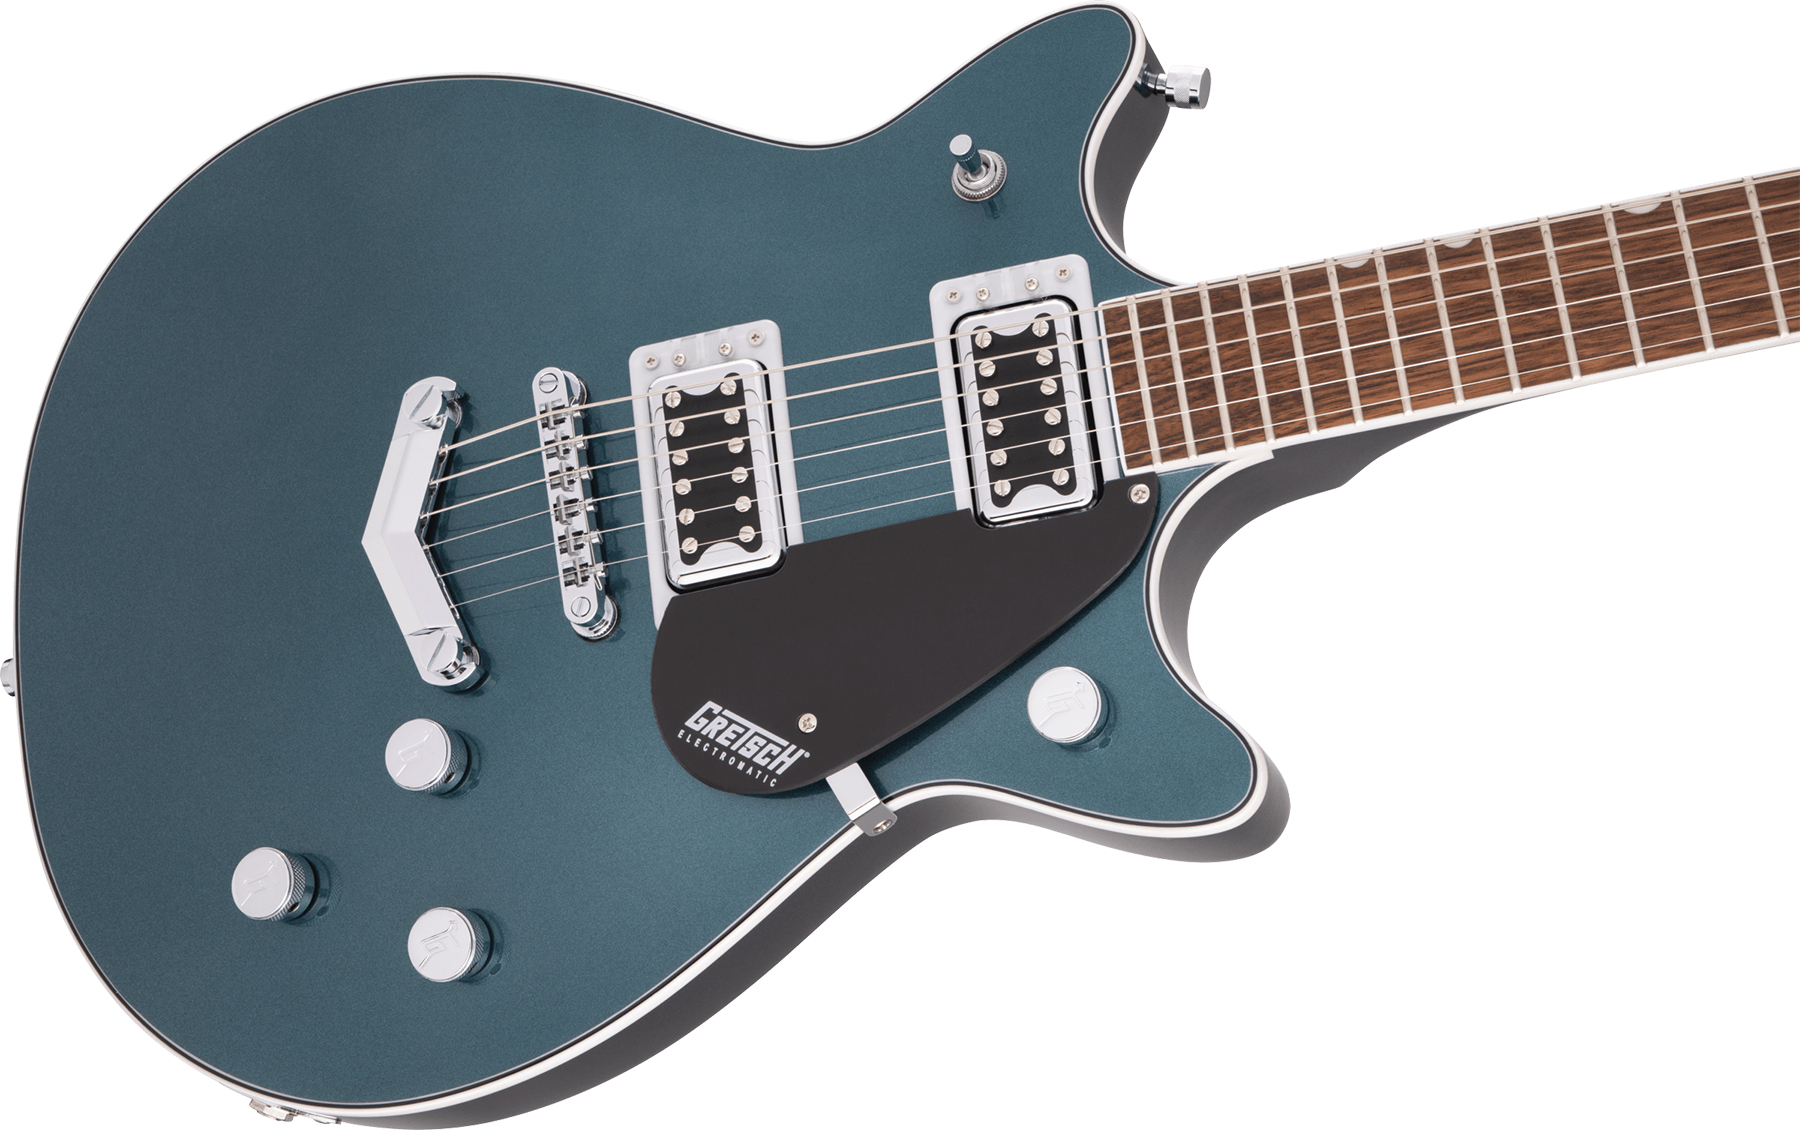 Gretsch G5222 Electromatic Double Jet Bt V-stoptail Hh Ht Lau - Jade Grey Metallic - Double cut electric guitar - Variation 2